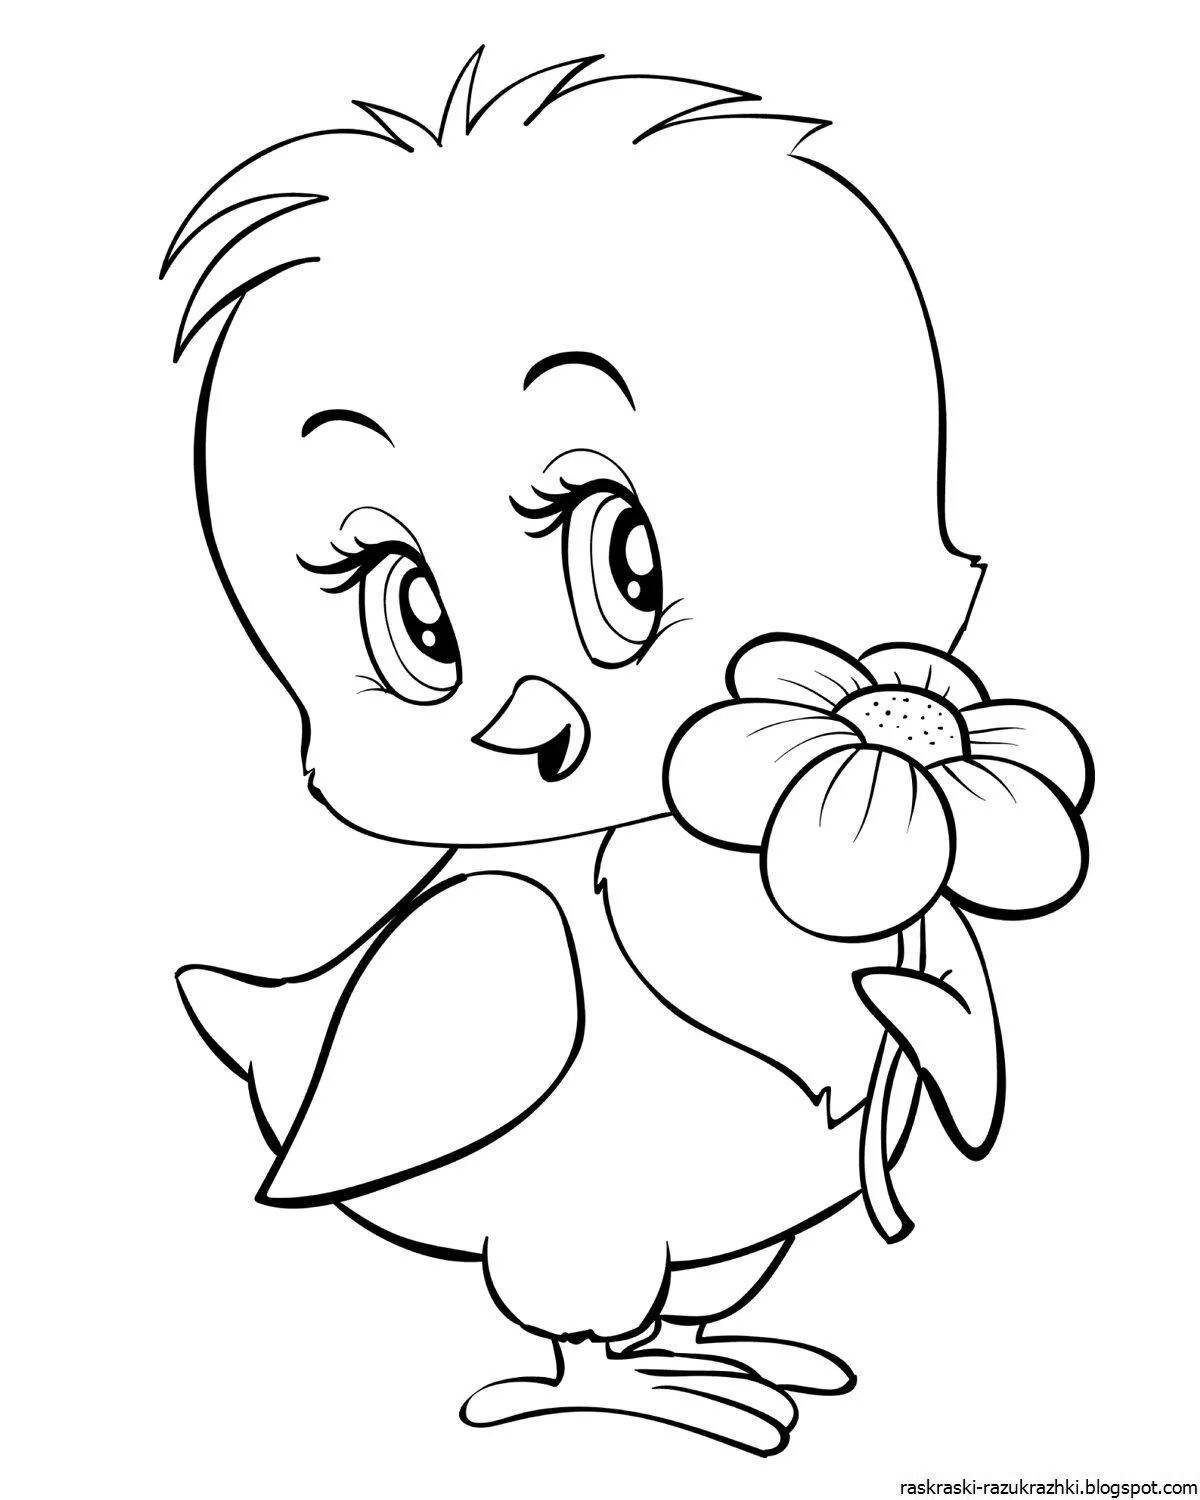 Tiny baby chick coloring book